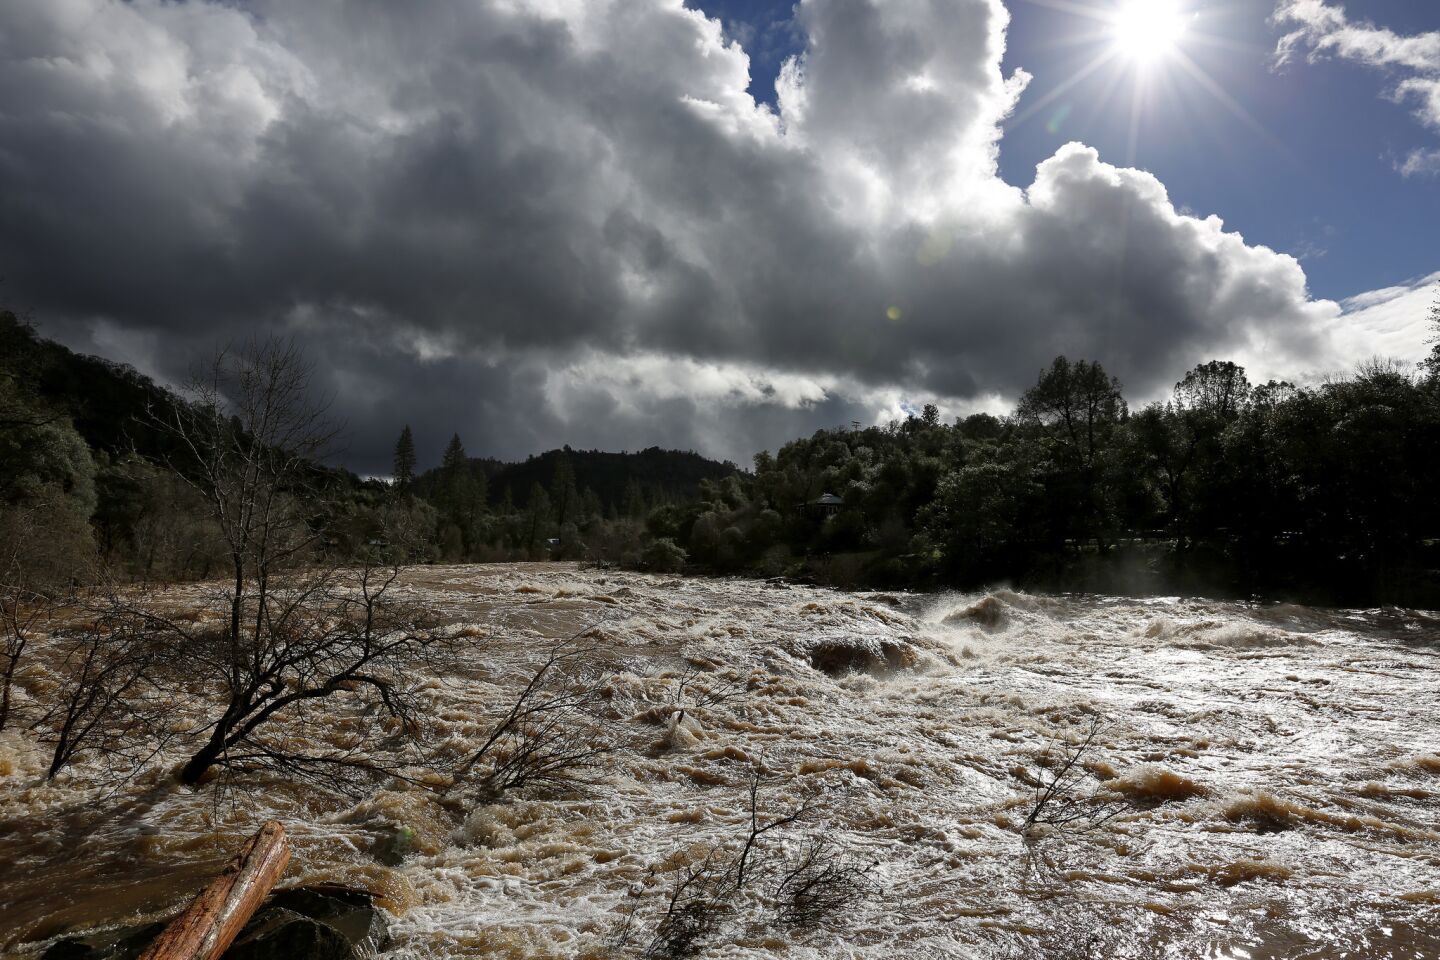 The Trouble Maker rapids on the American River in Coloma swell after a week of rains in Northern California.